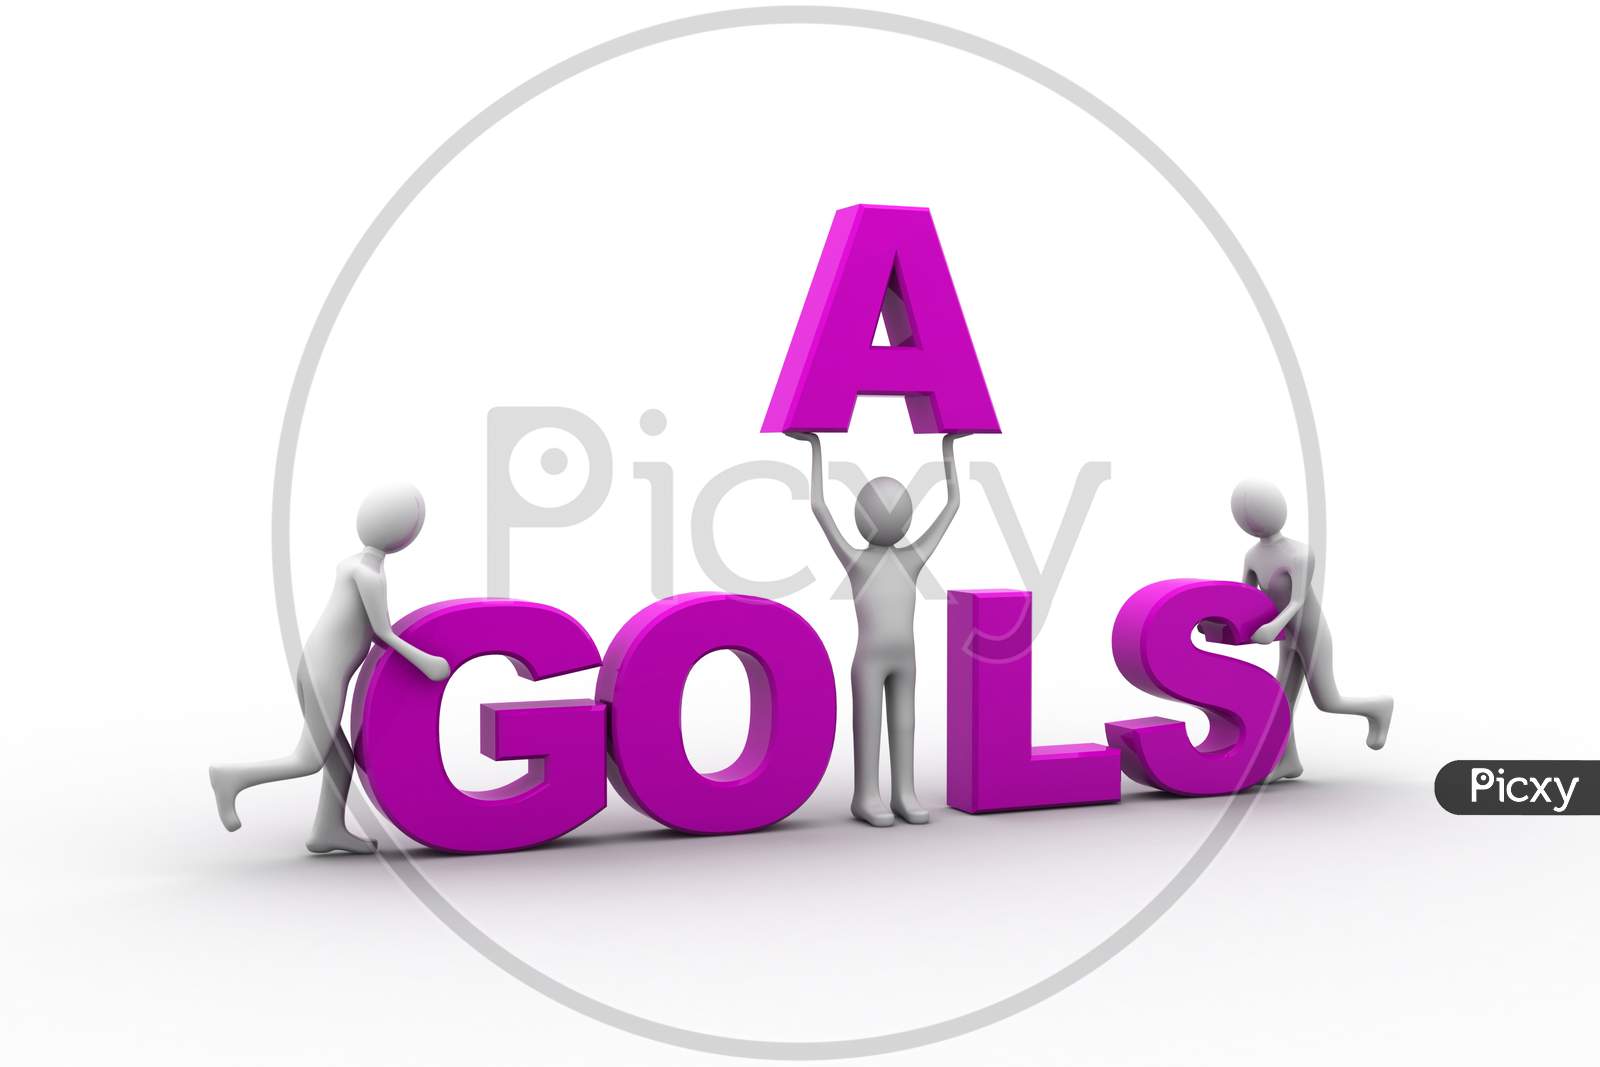 Concept of People Holding GOALS Text